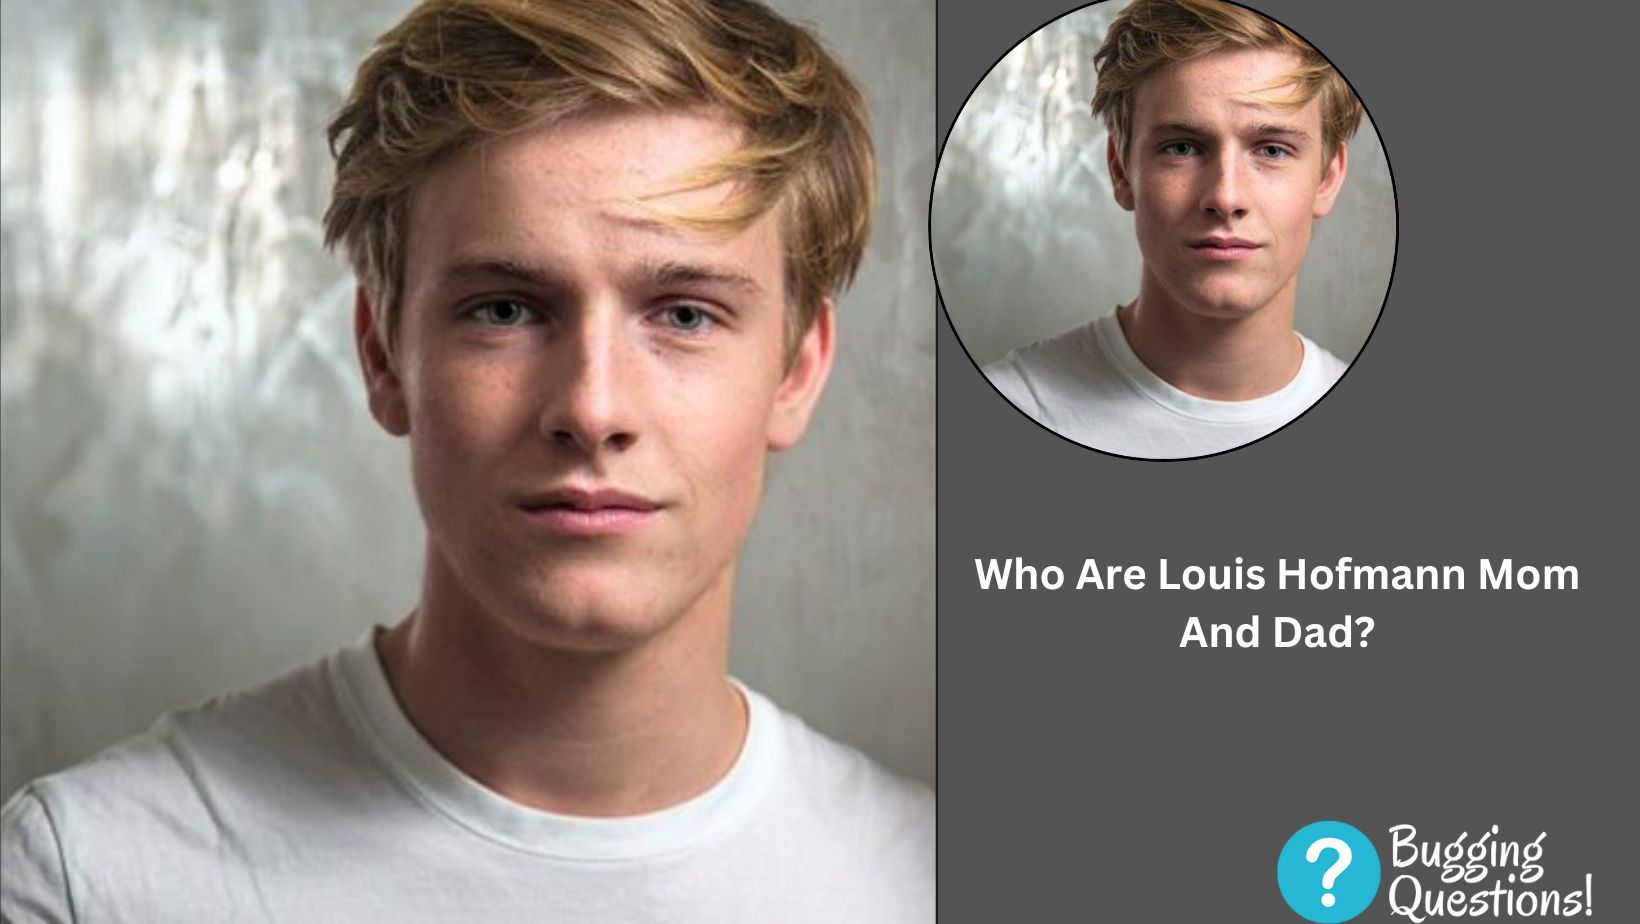 Who Are Louis Hofmann Mom And Dad?